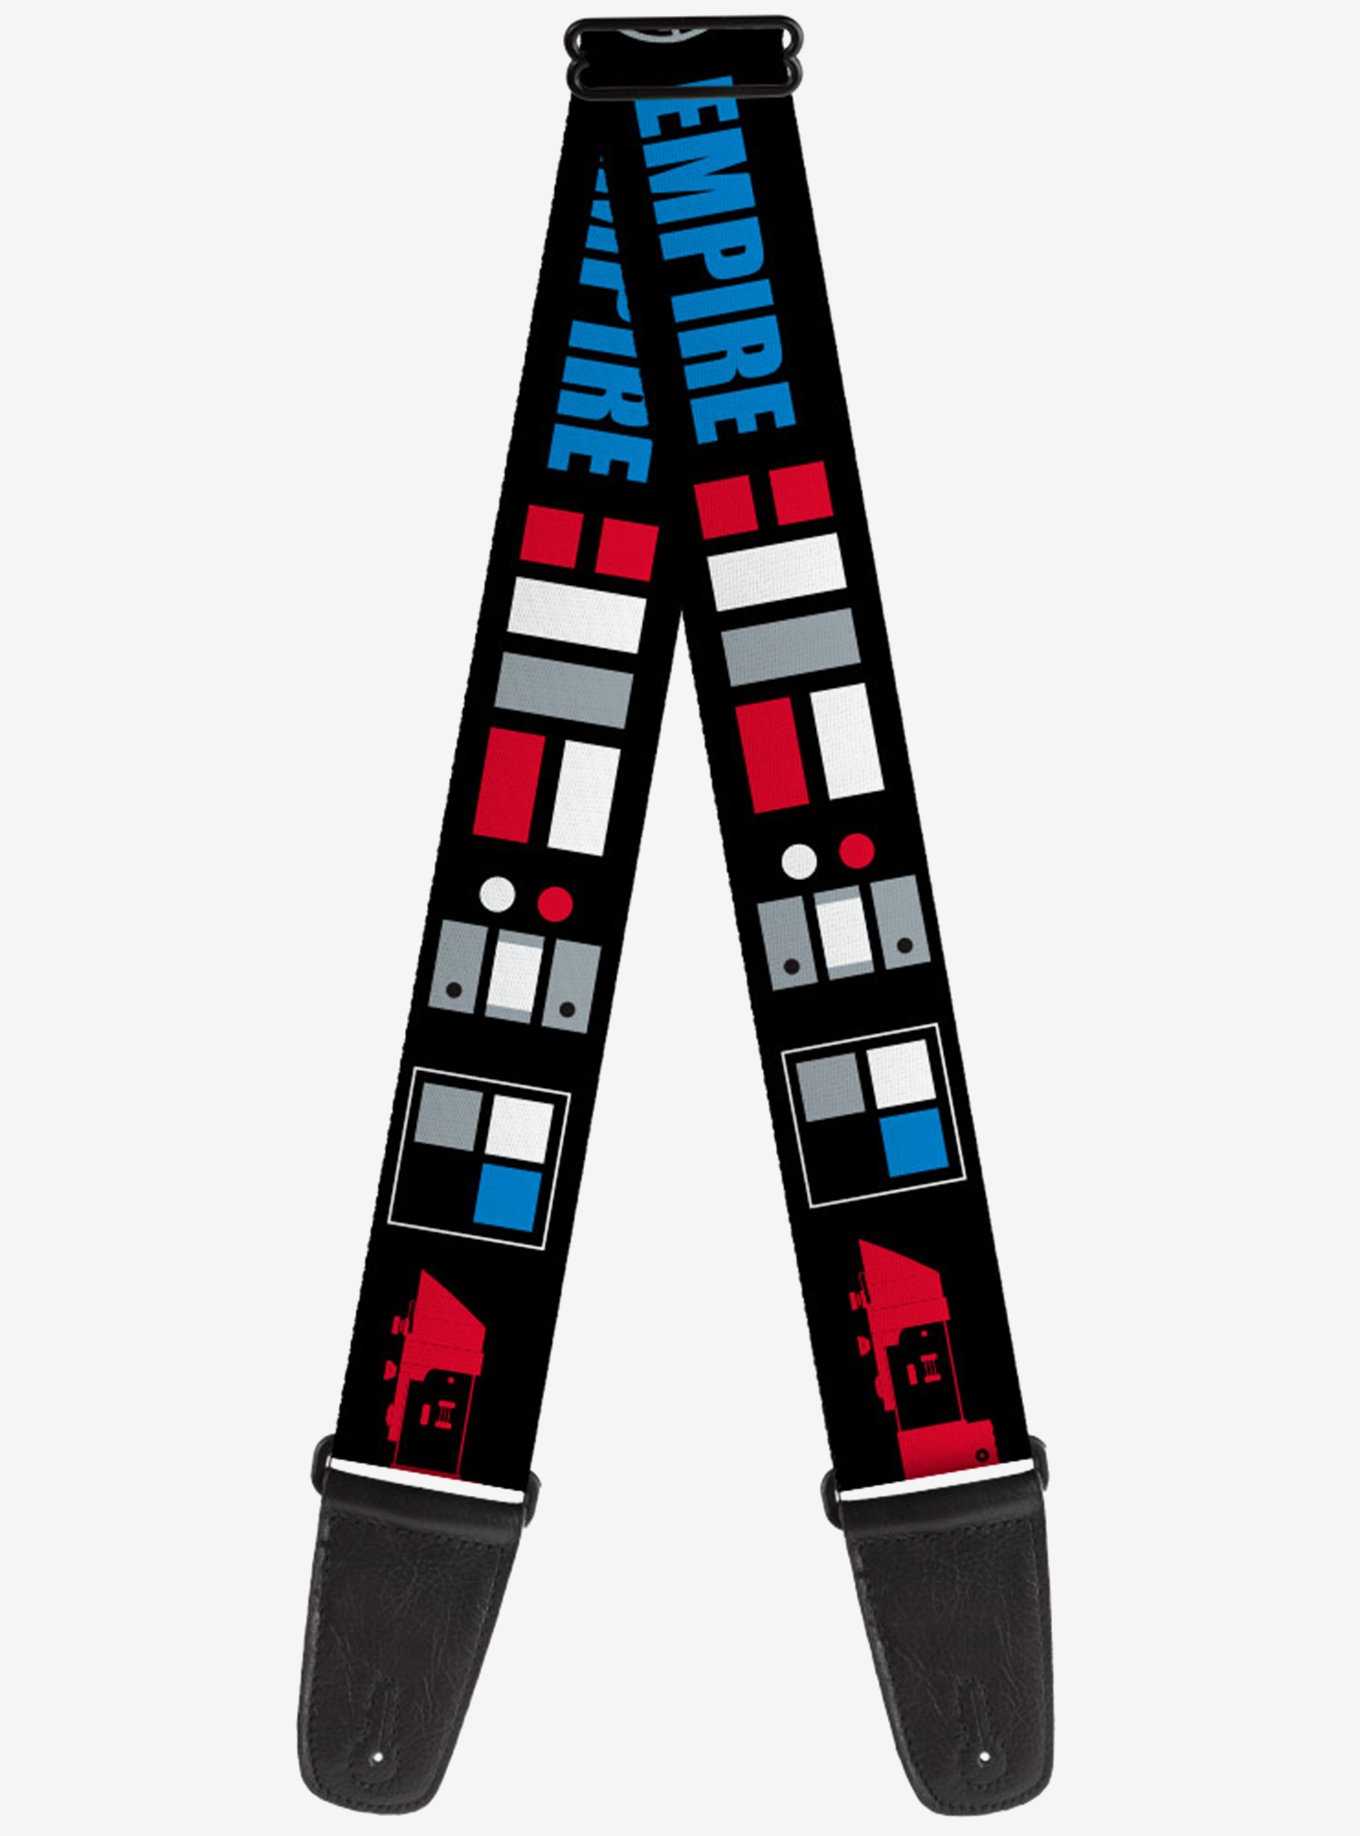 Star Wars Galactic Empire Elements Collage Guitar Strap, , hi-res